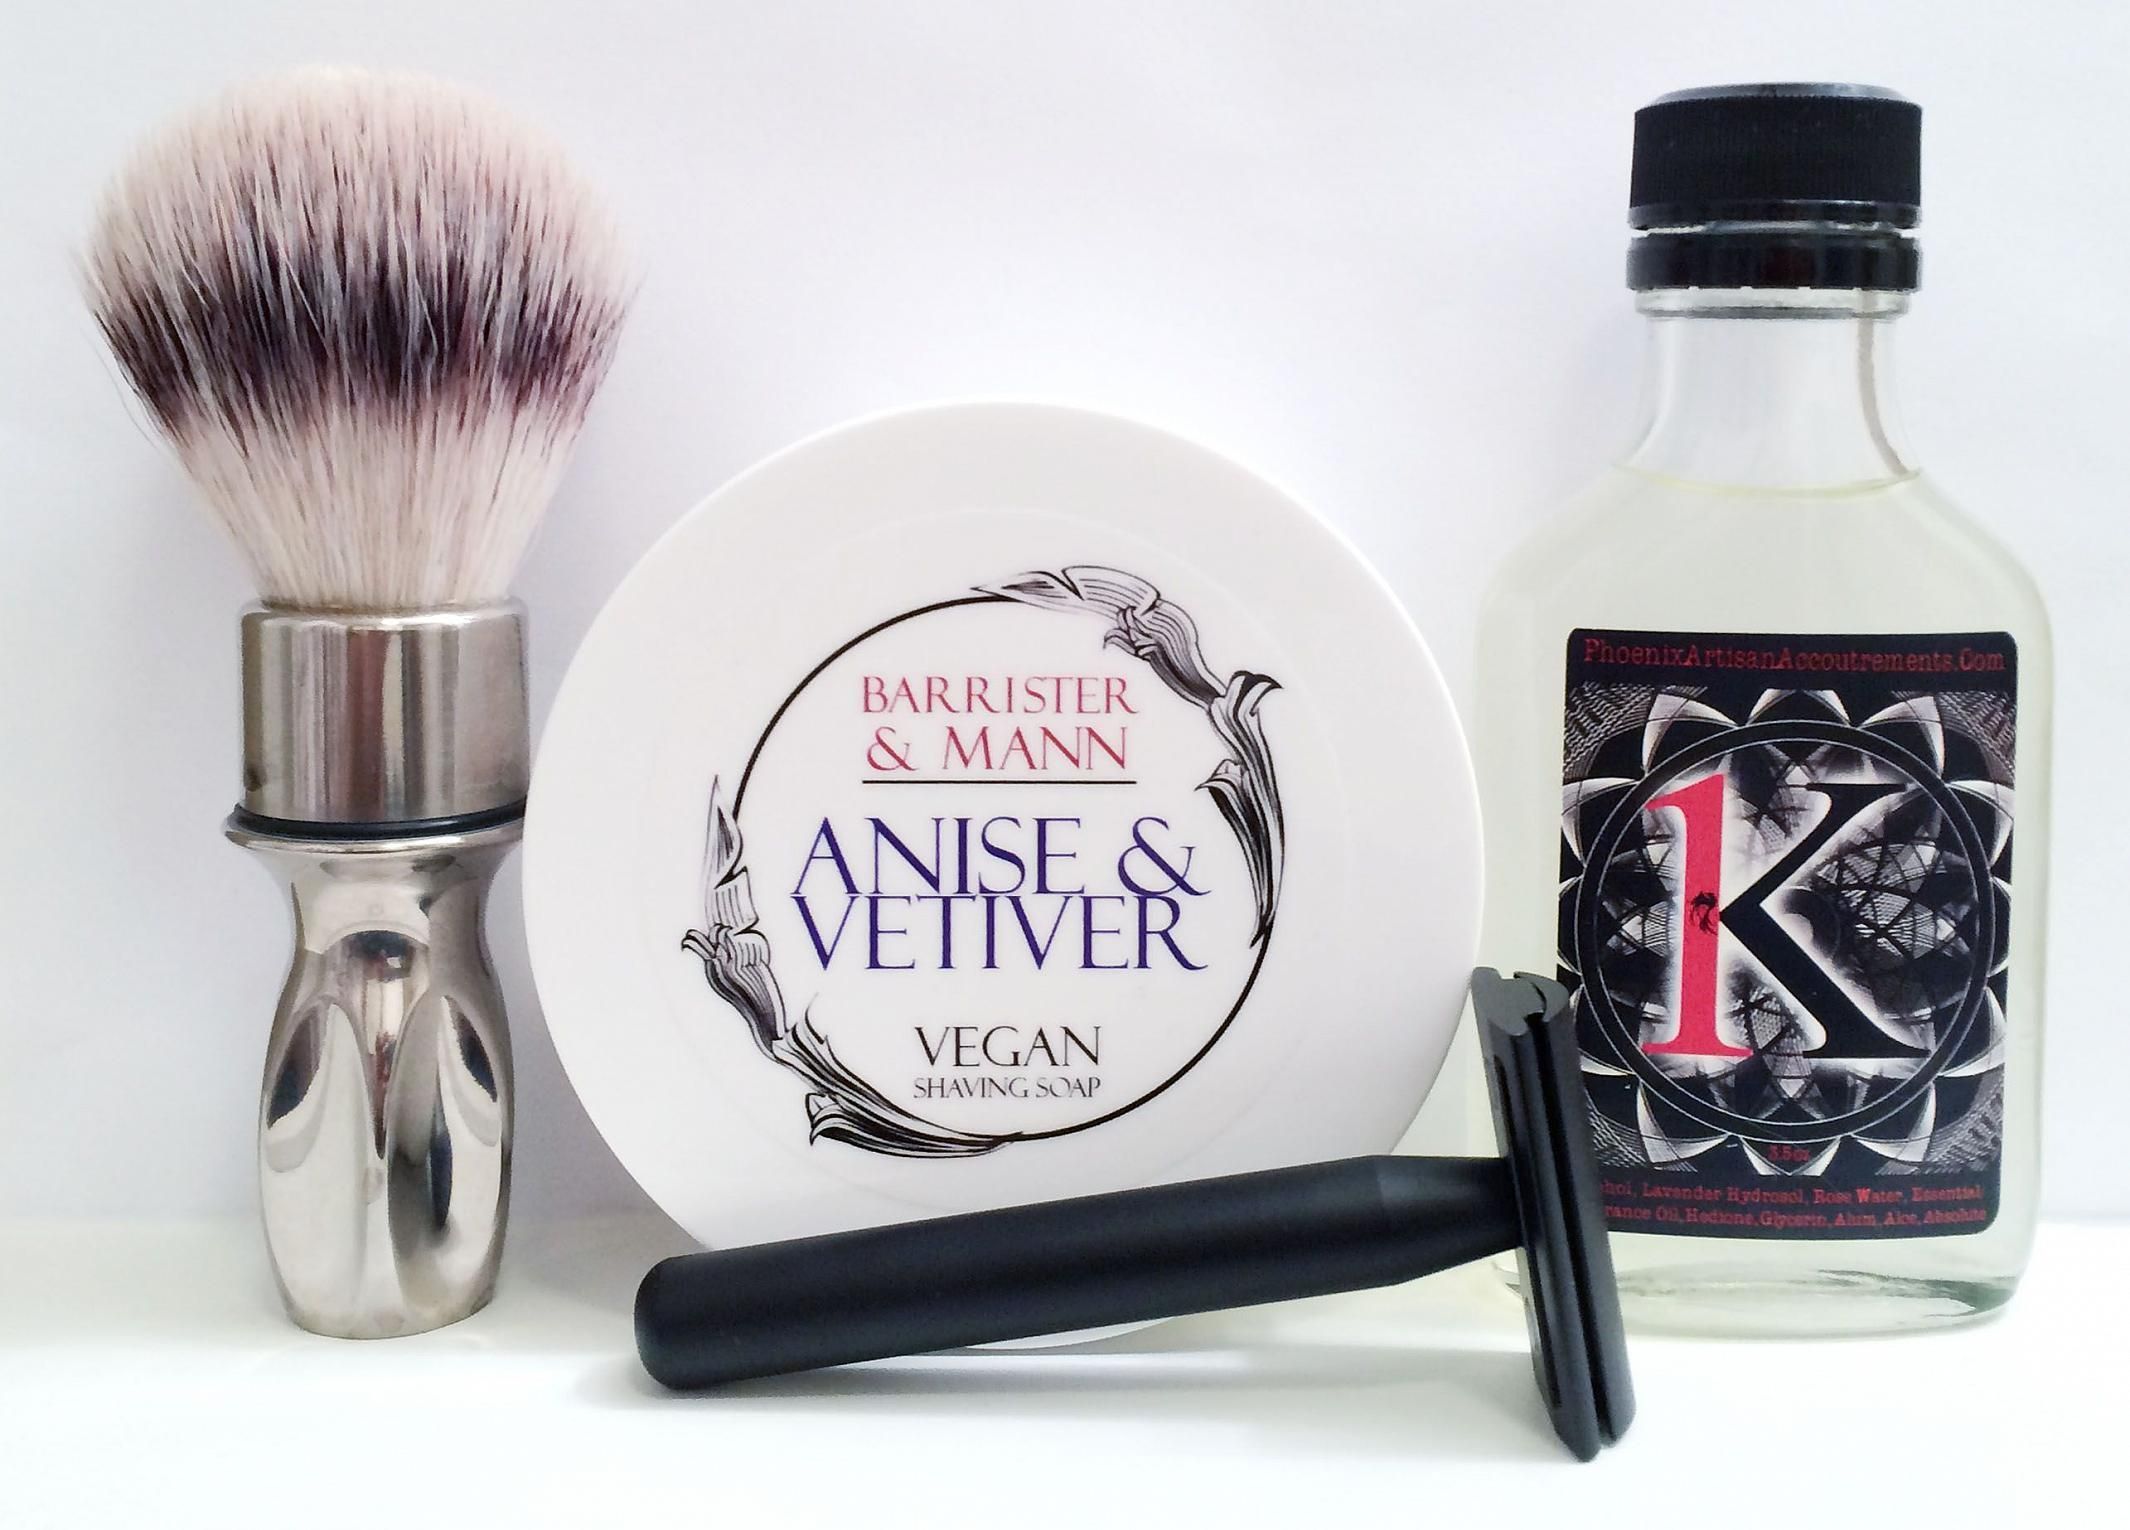 Barrister and Mann "Anise & Vetiver"